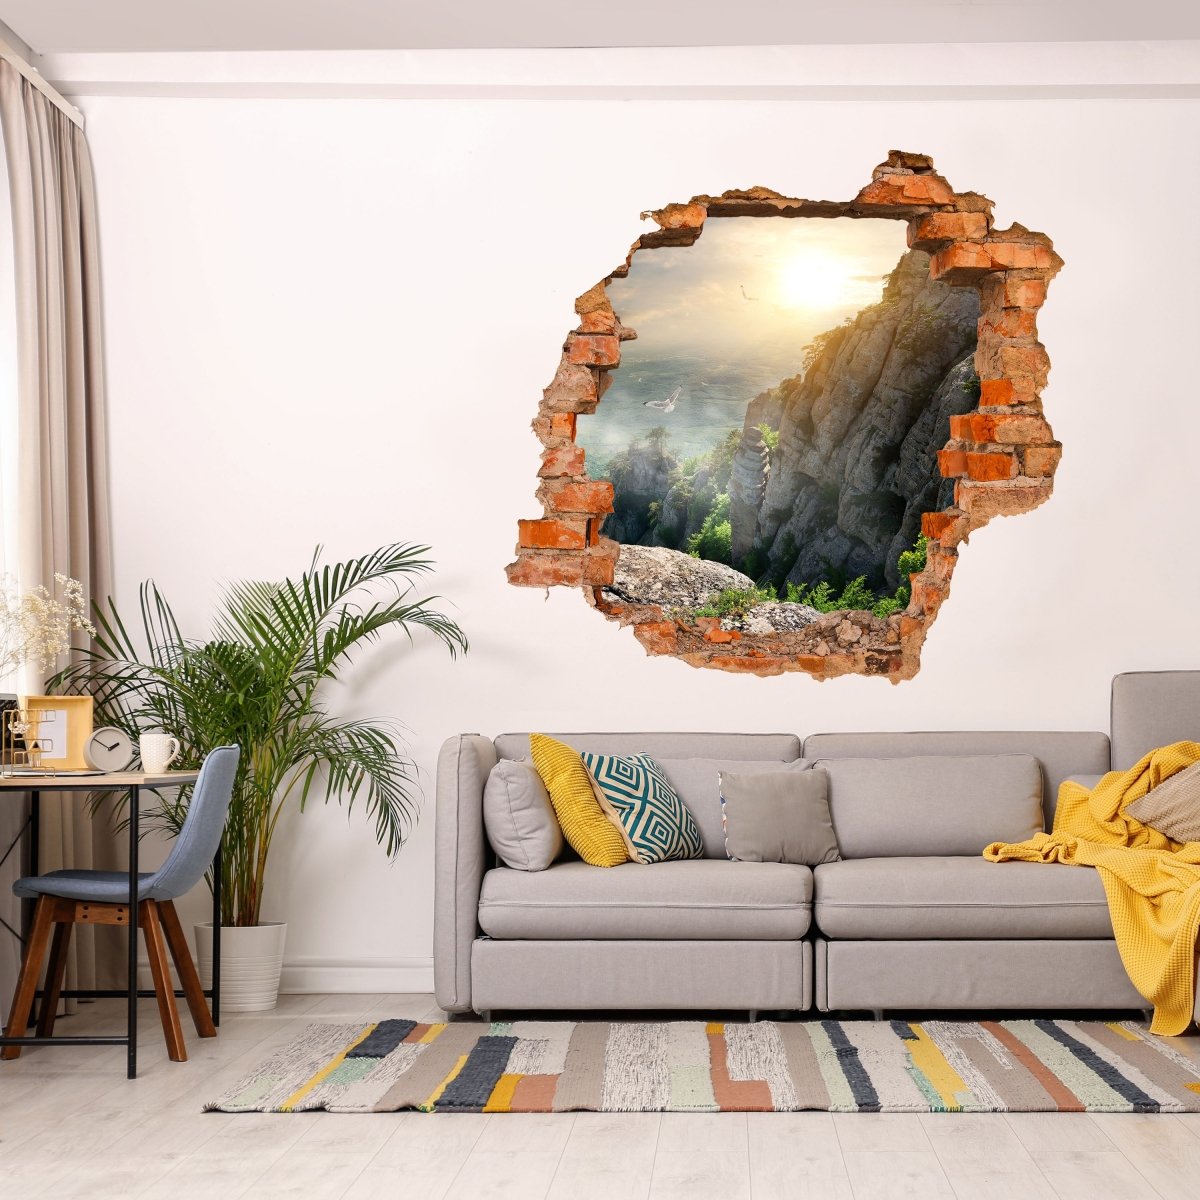 3D mountain view wall sticker - Wall Decal M0692